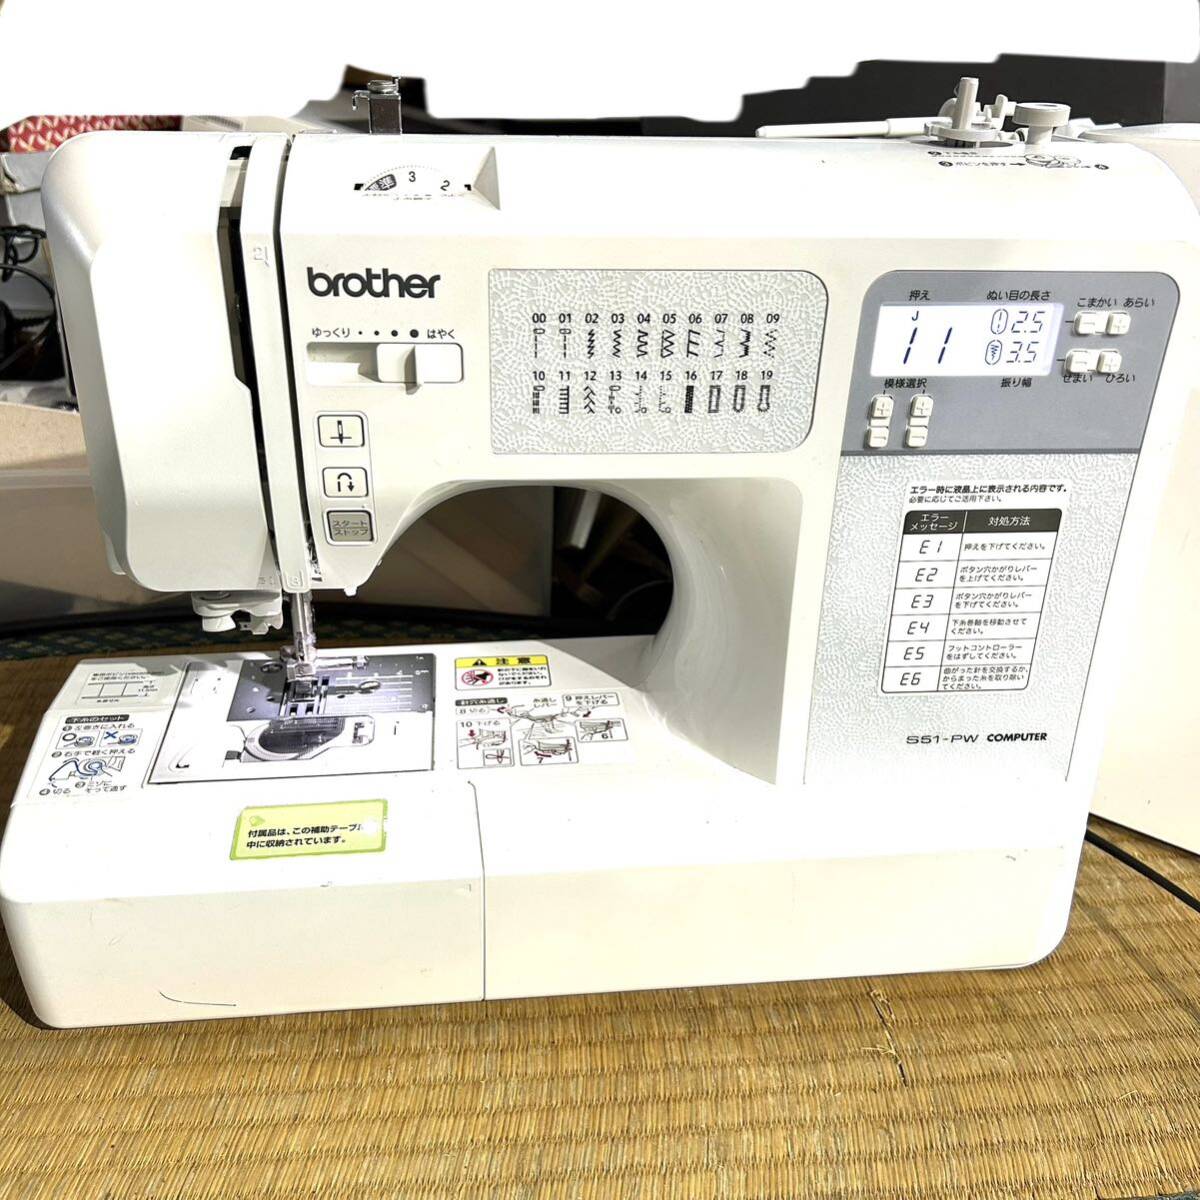 brother Brother computer sewing machine S51-PW electrification operation verification ending (B4666)